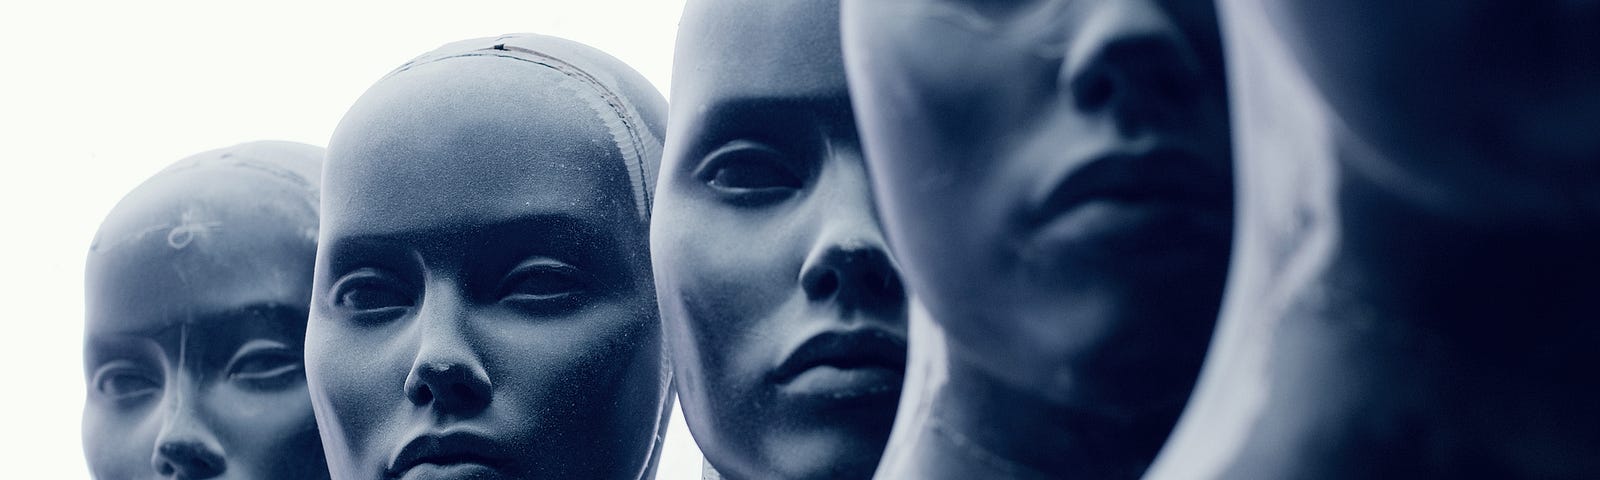 A photo of five sculpture-like human faces.